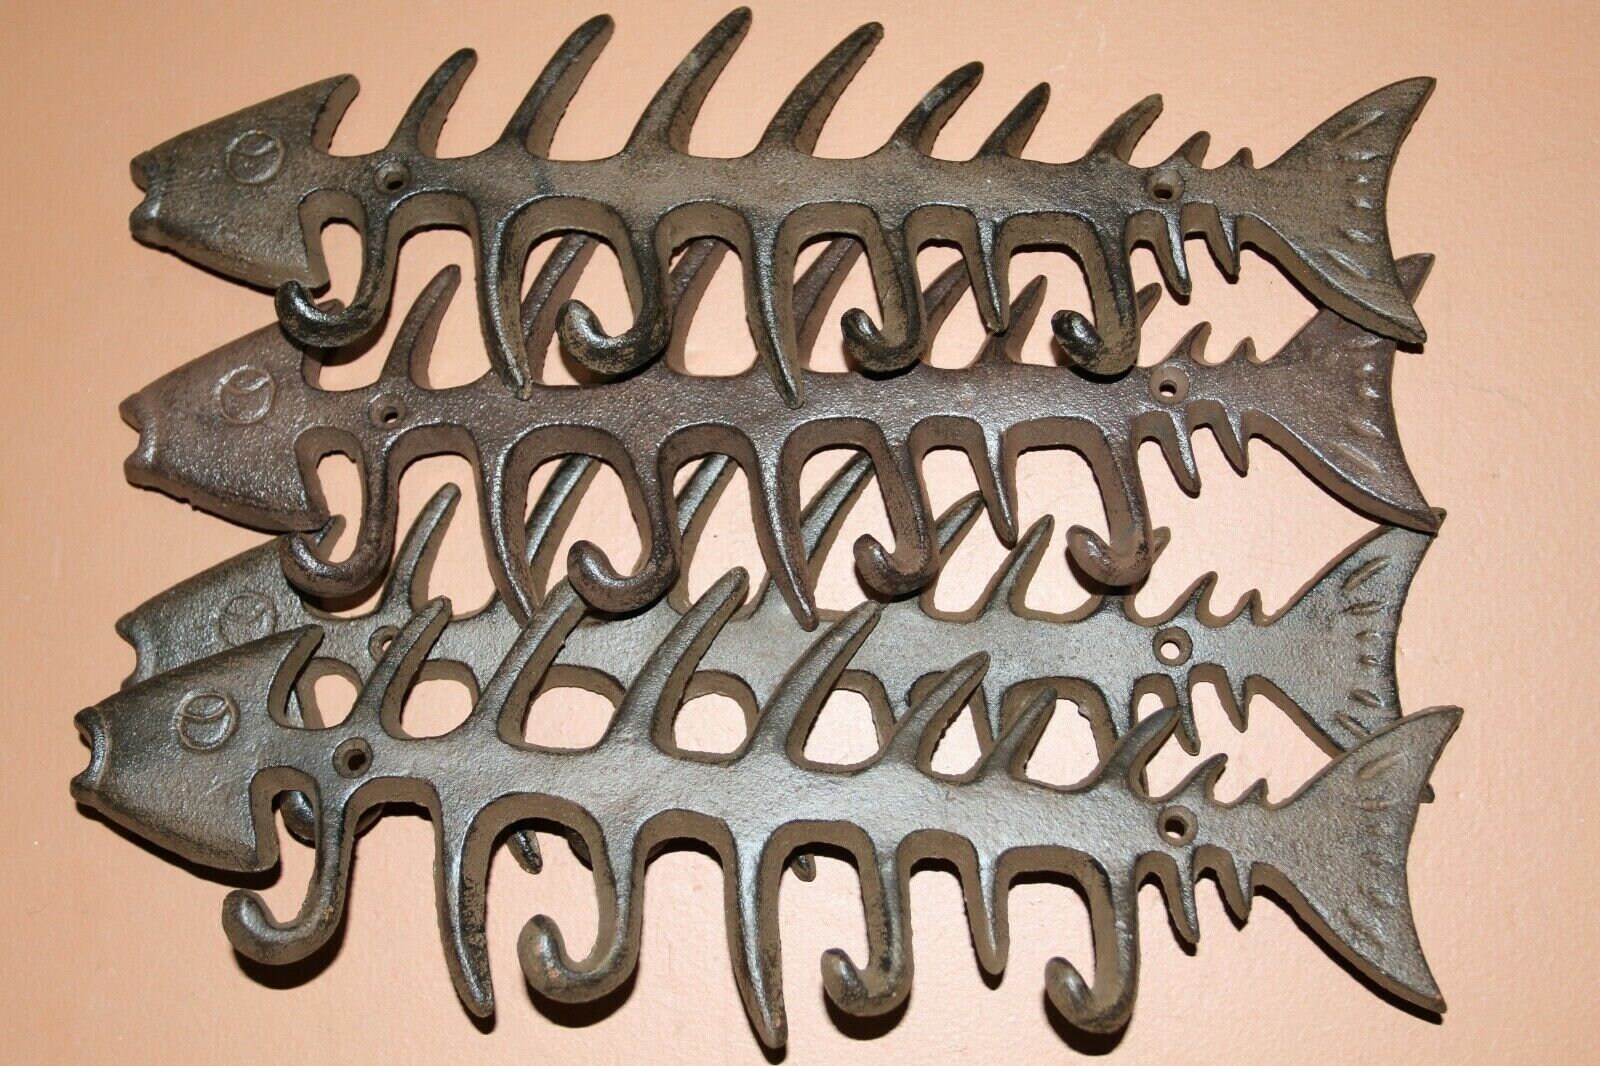 Fish Cleaning Station Wall Hook Rack Large Fish Bone Cast Iron N